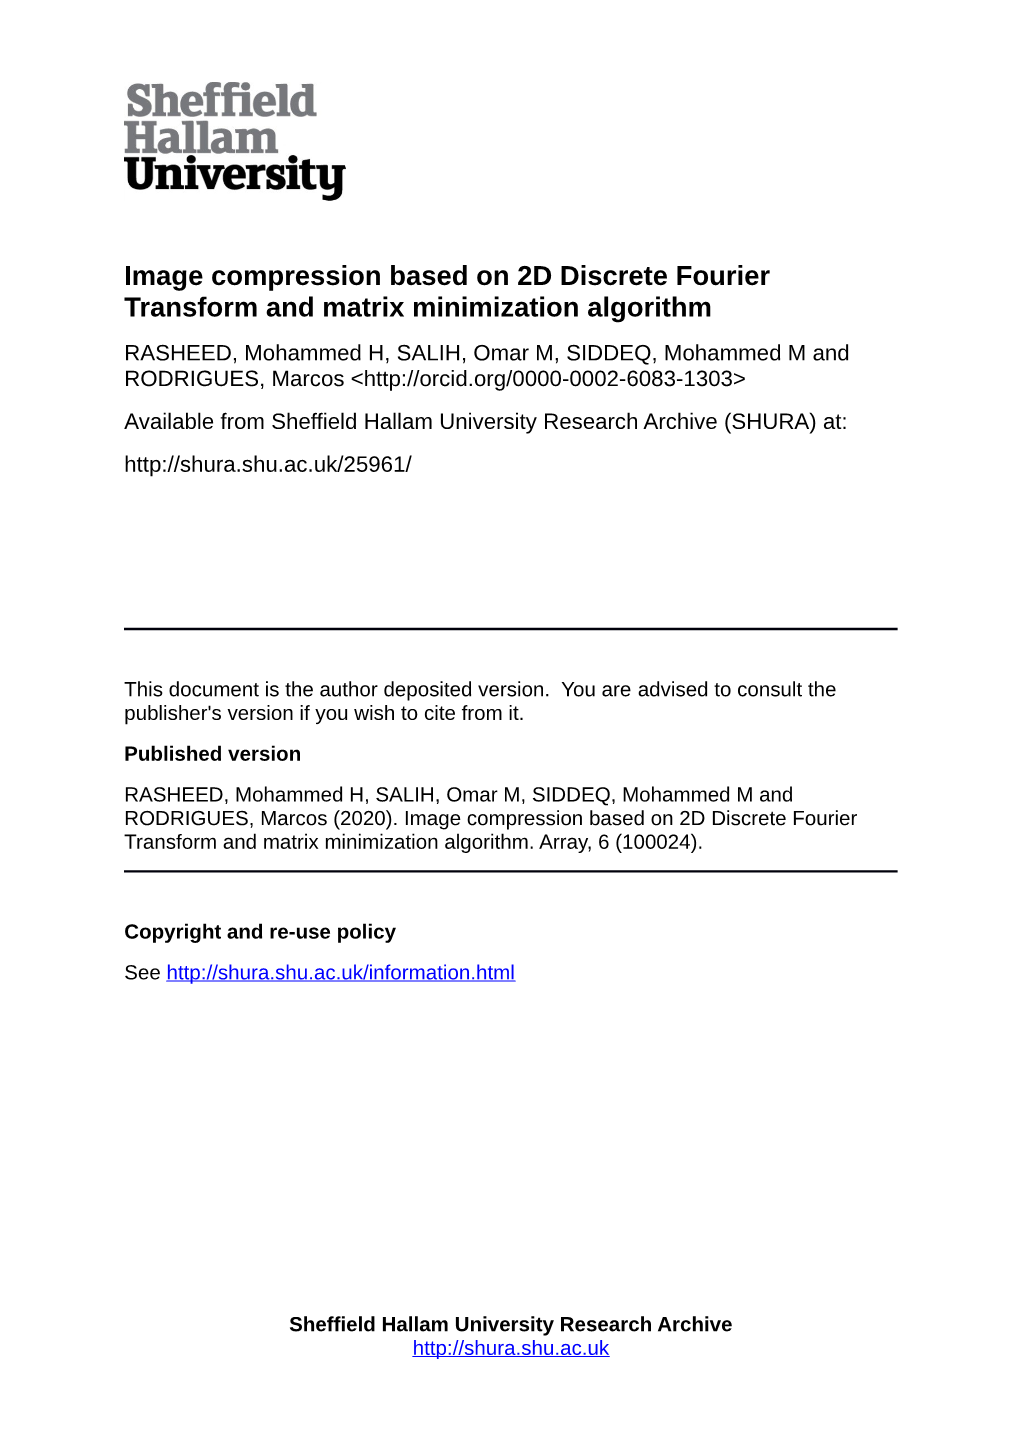 Image Compression Based on 2D Discrete Fourier Transform And